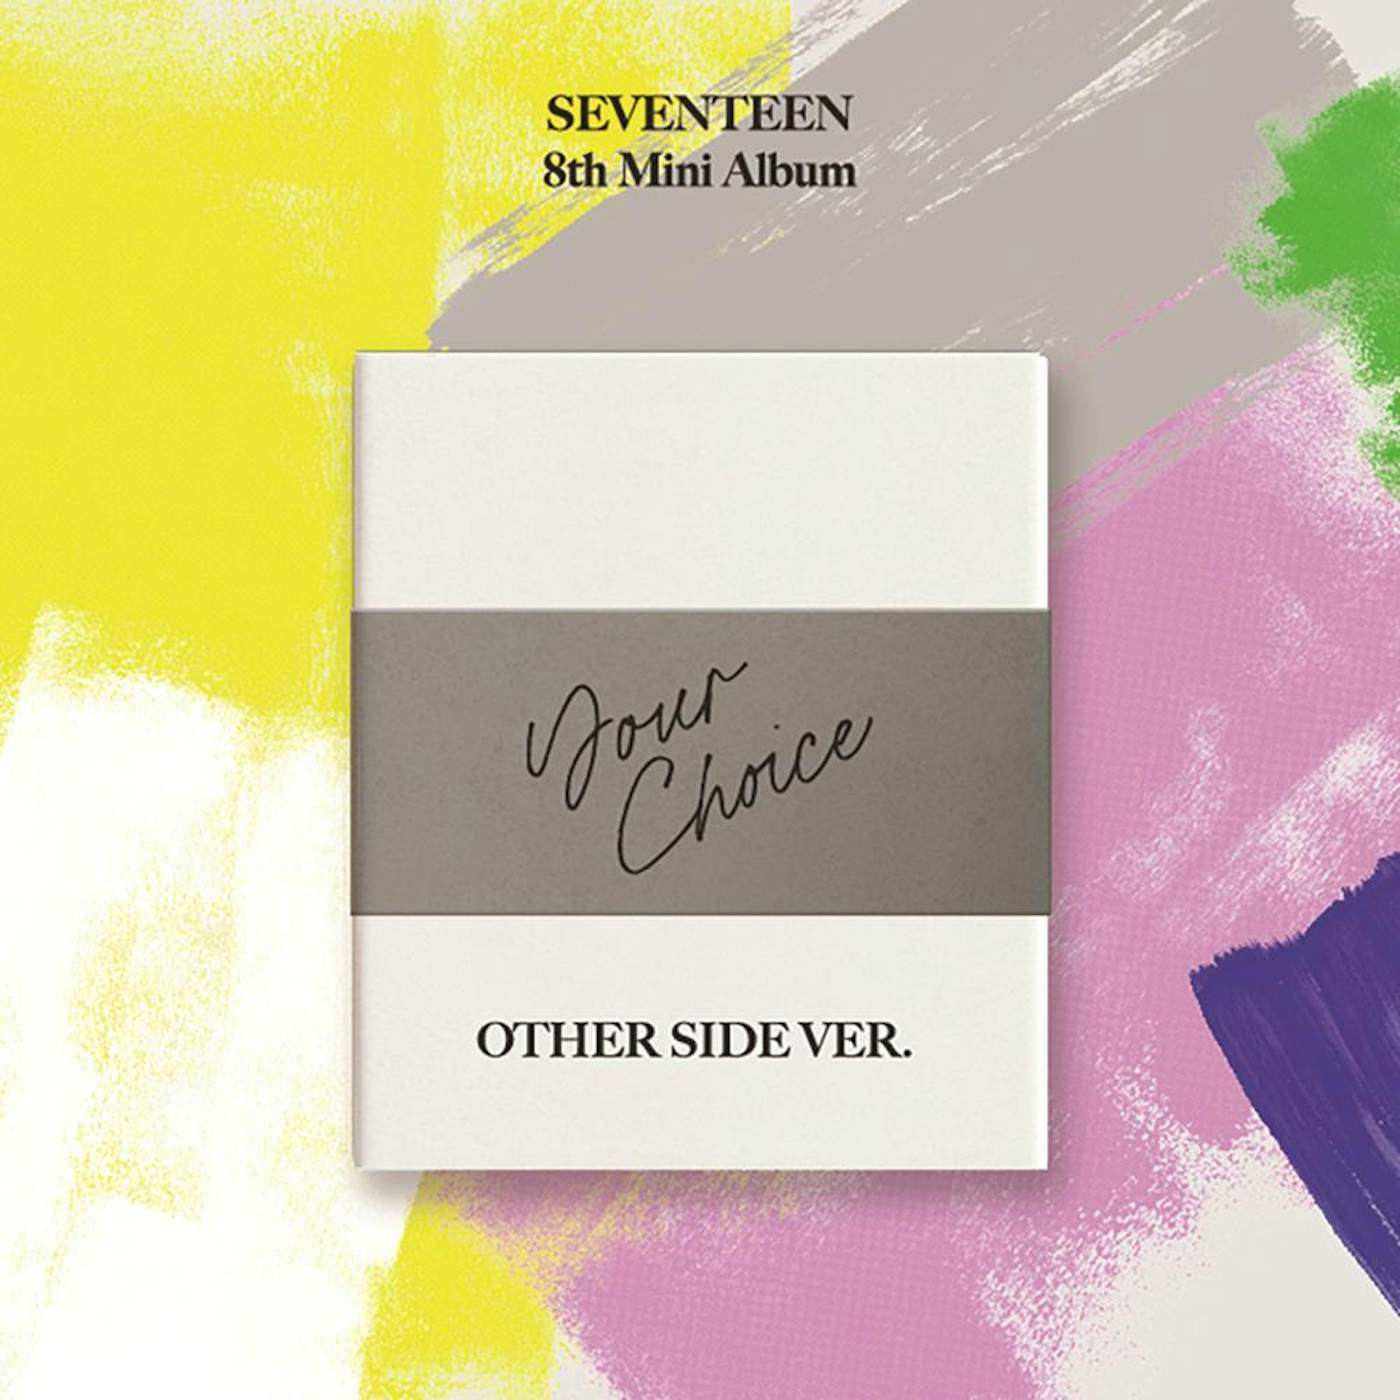 SEVENTEEN YOUR CHOICE - 8TH MINI ALBUM (OTHER SIDE VERSION) CD